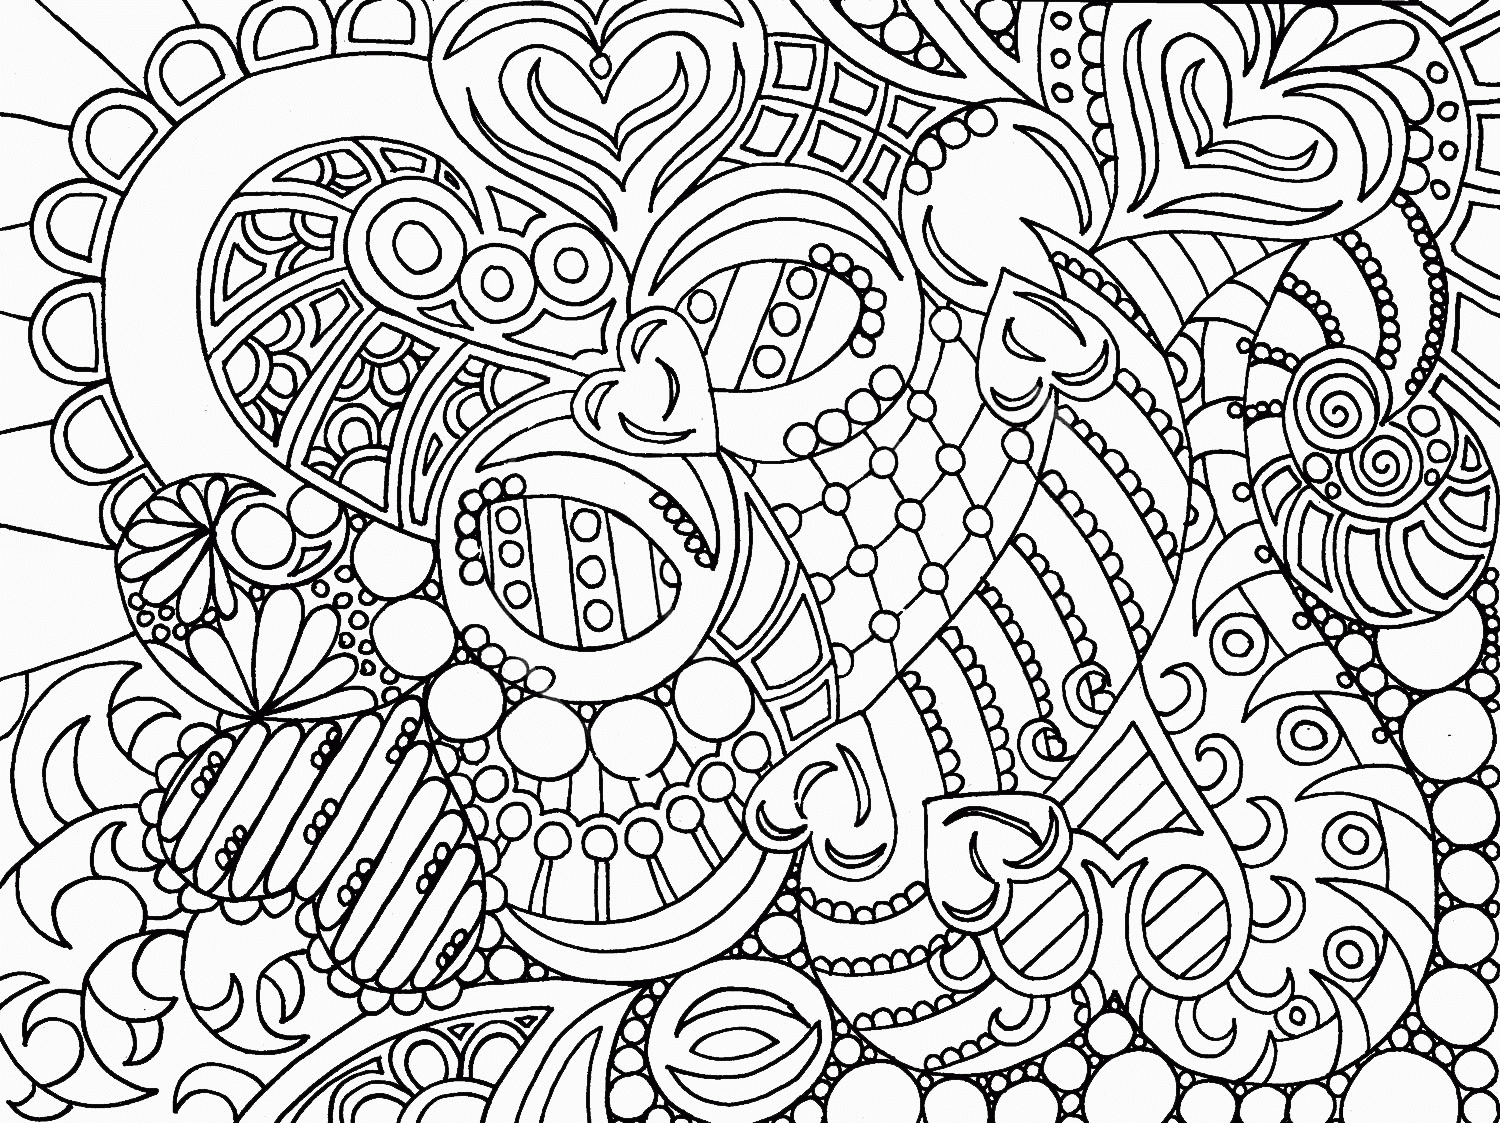 Abstract 20 Coloring Page   Free Printable Coloring Pages for Kids